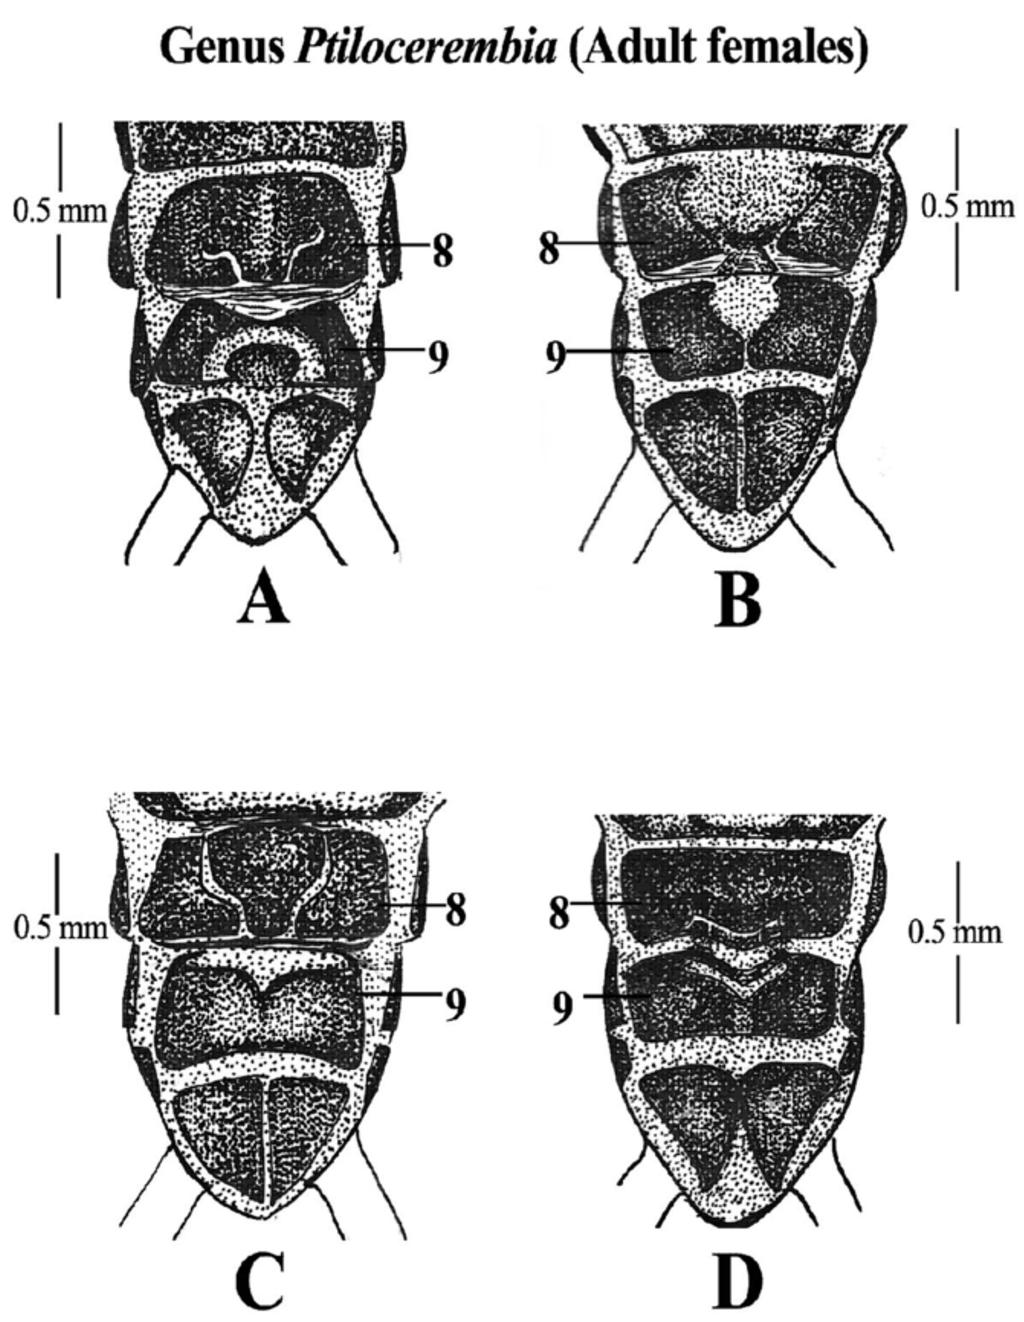 FIGURE 6. Illustrations of sternites, especially on 8th and 9th abdominal segments of female Ptilocerembia thaidina sp. n. (A), P. senathami sp. n. (B), P. catherinae sp. n. (C) and P. rossi sp. n. (D) Ptilocerembia rossi sp.